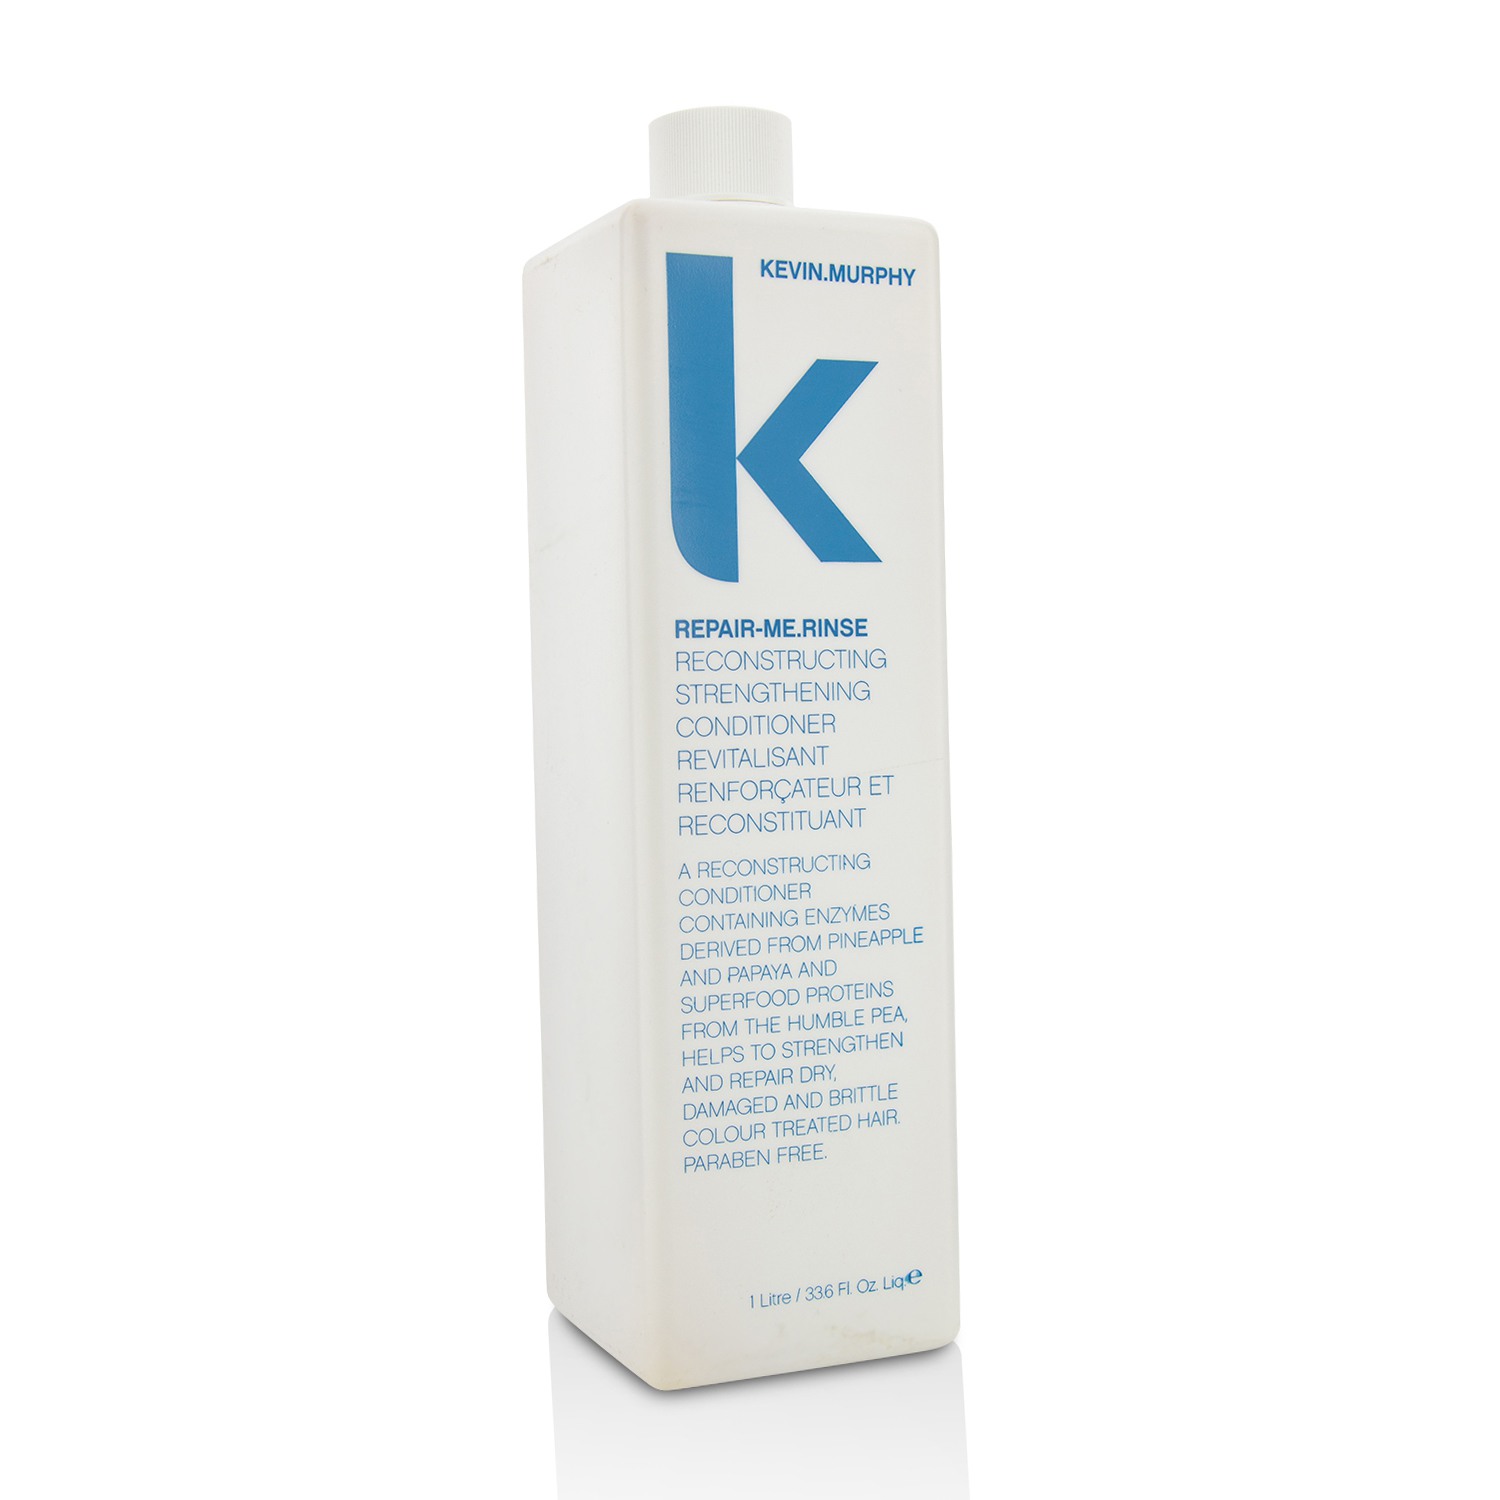 Repair-Me.Rinse (Reconstructing Stregthening Conditioner) Kevin.Murphy Image